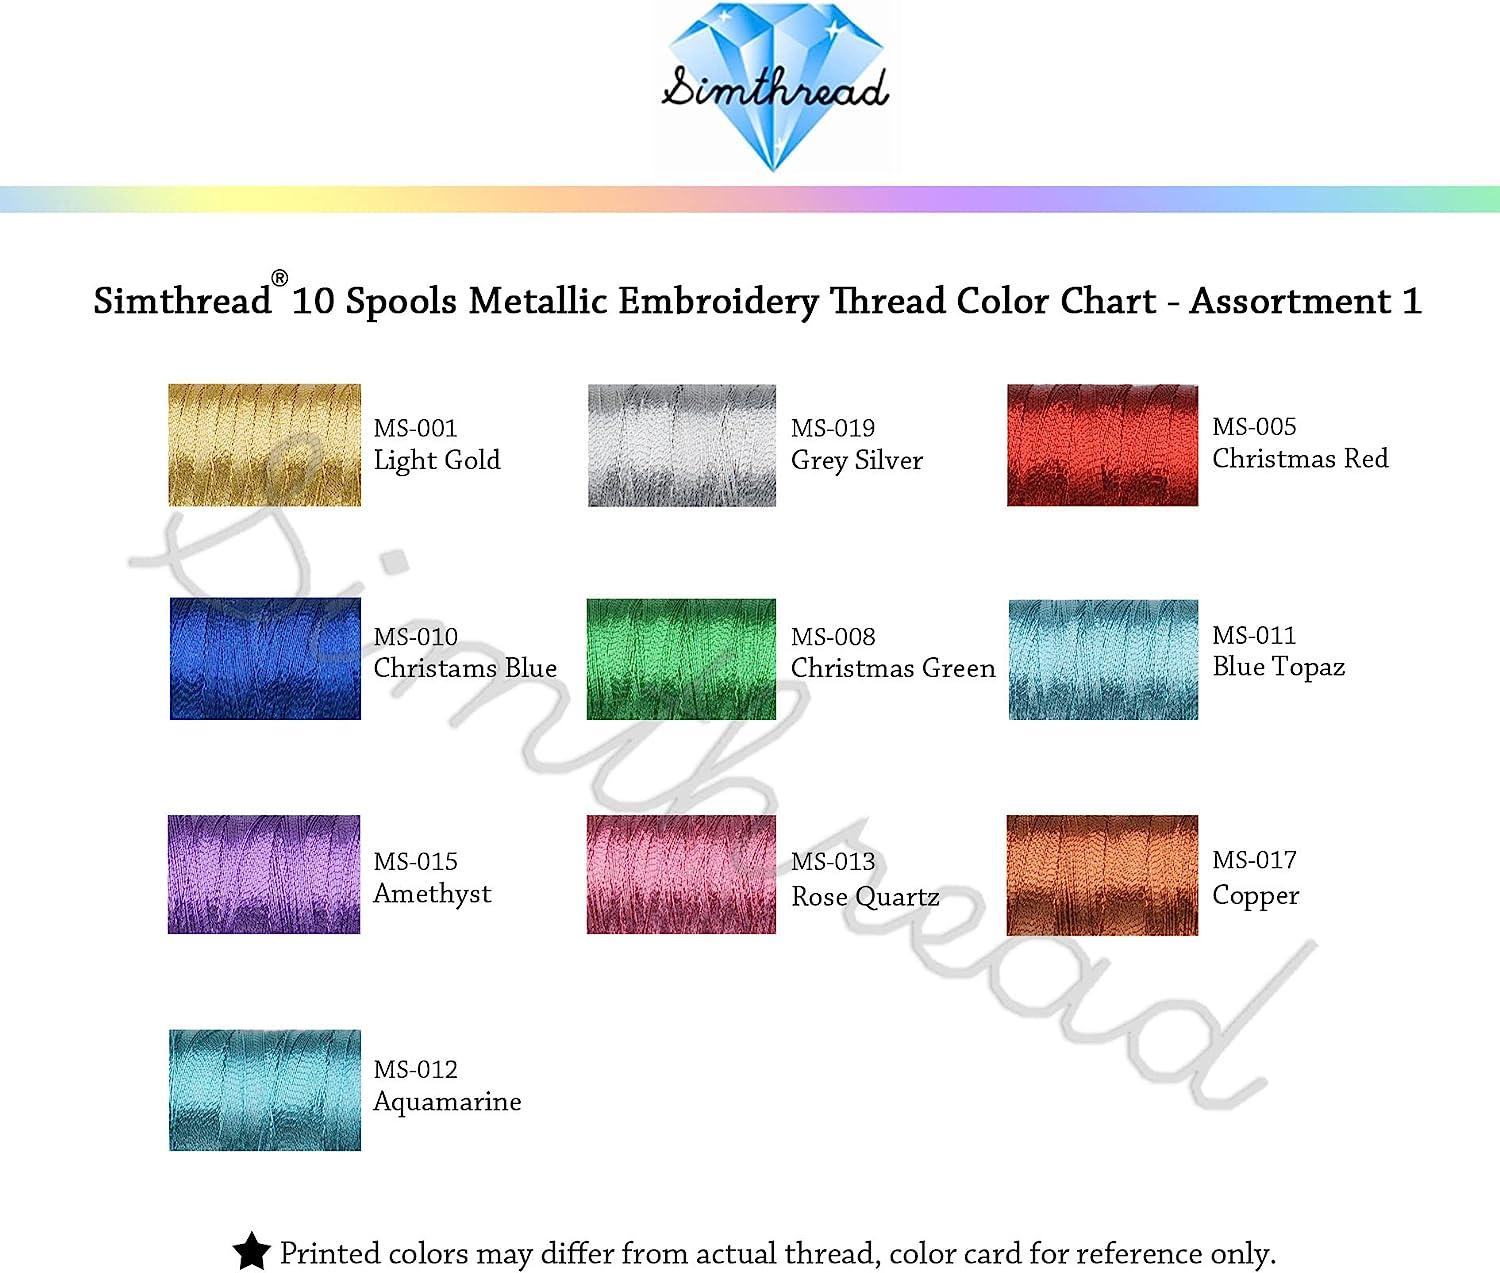 Simthread 63 Brother Colors Polyester Embroidery Machine Thread Kit 40  Weight